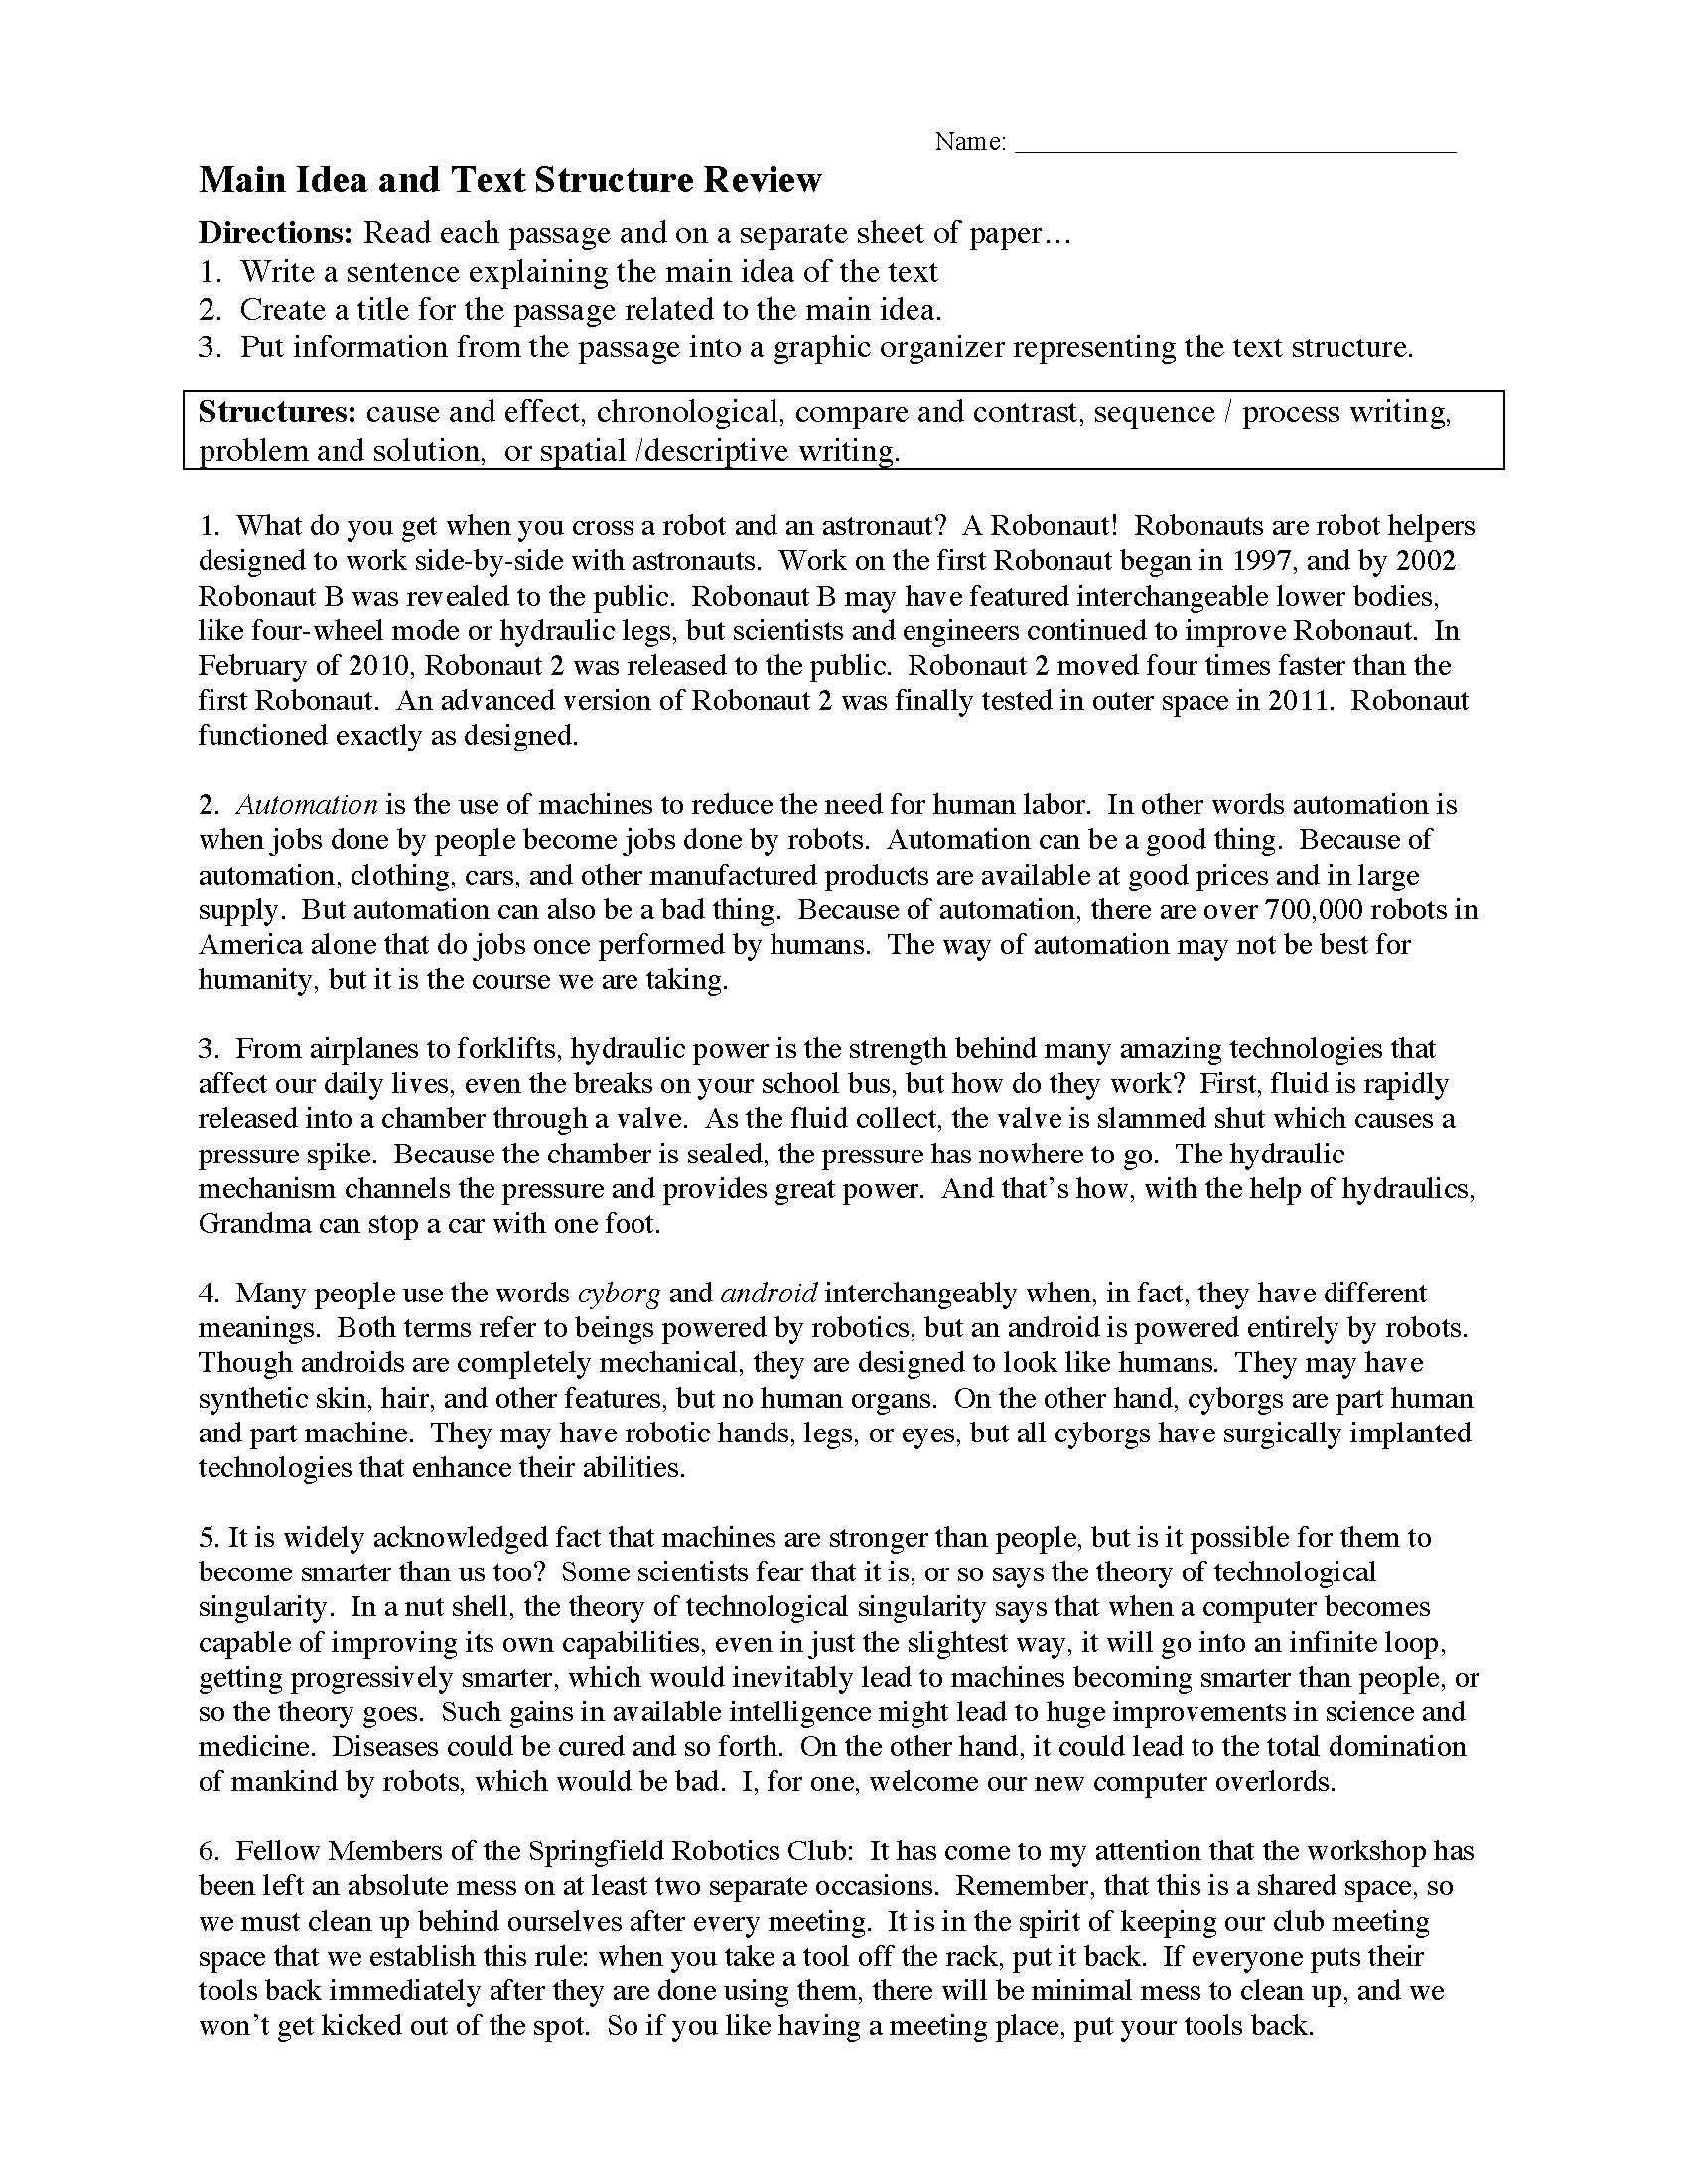 This is a preview image of the Main Idea and Text Structure Worksheet 2.